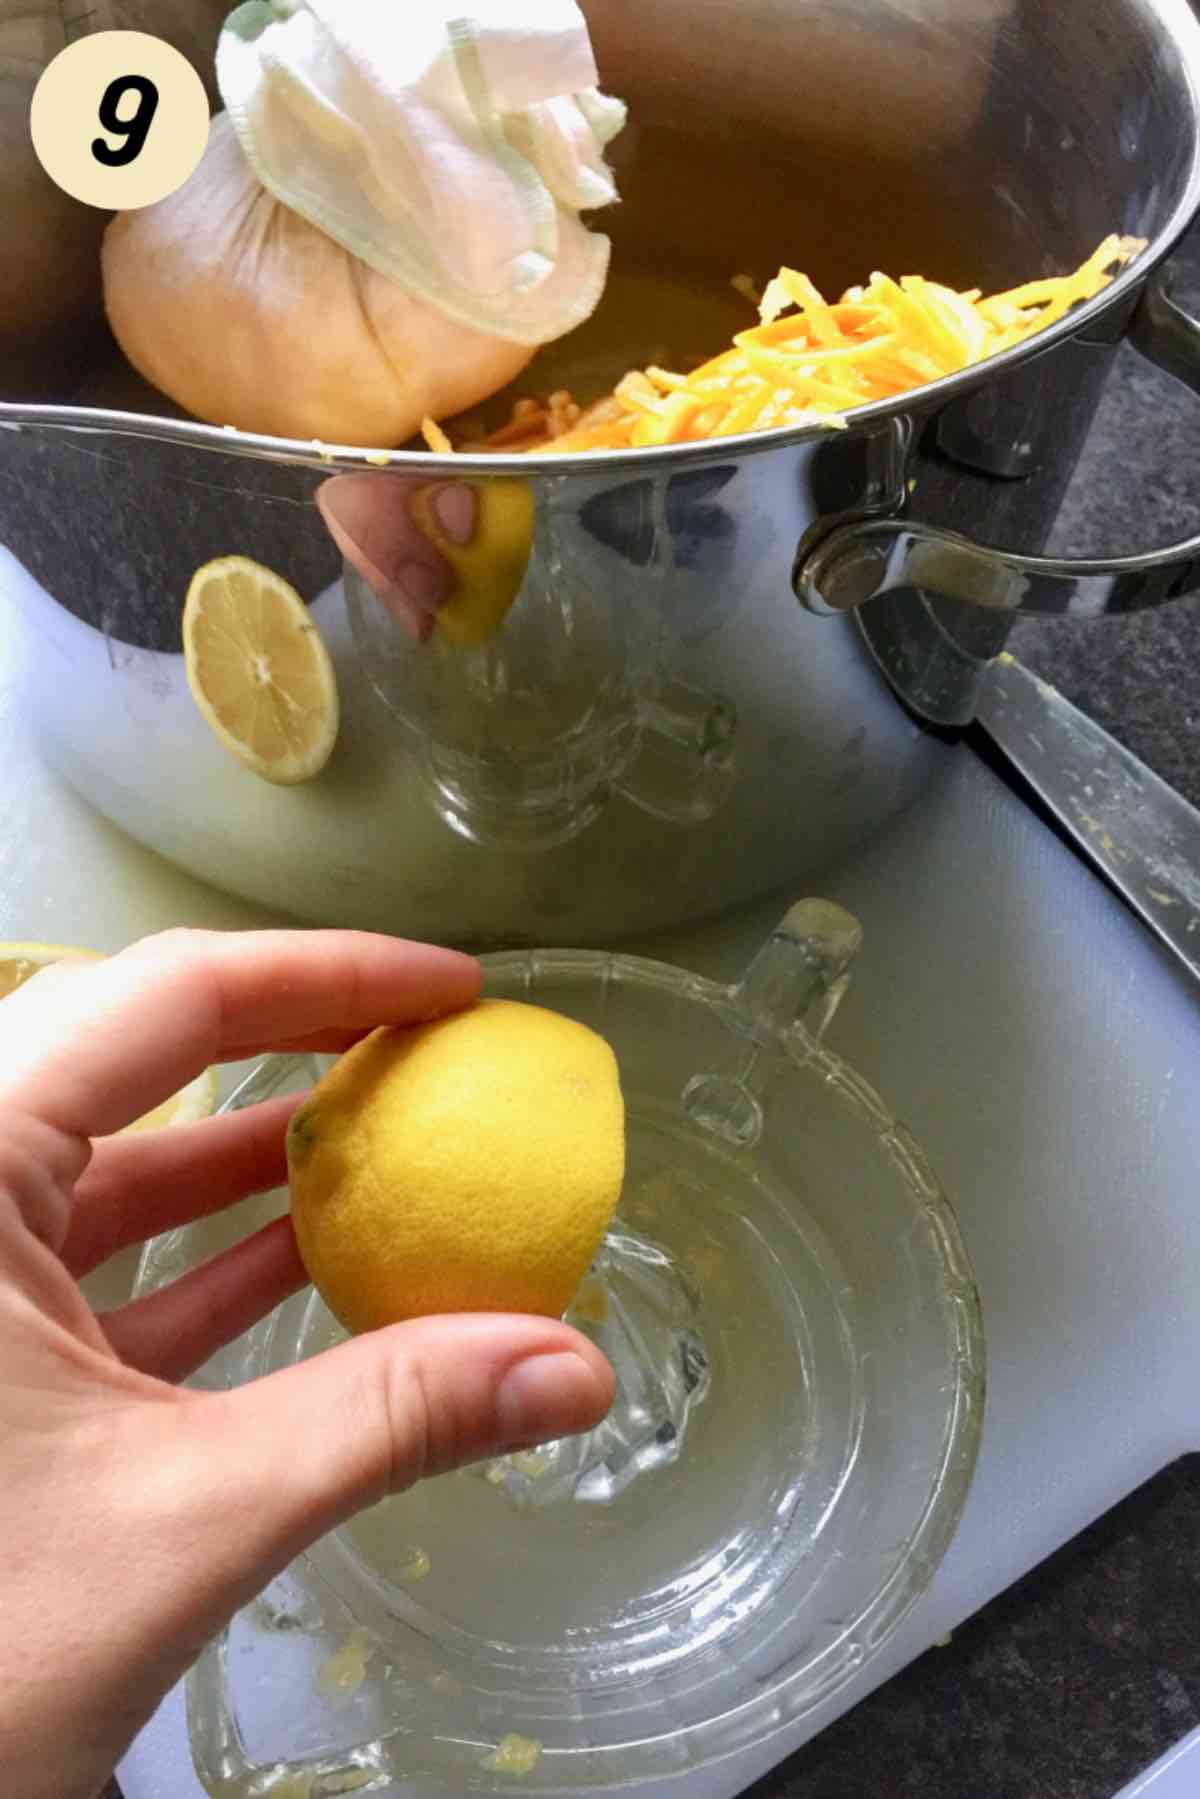 Lemon being squeezed.